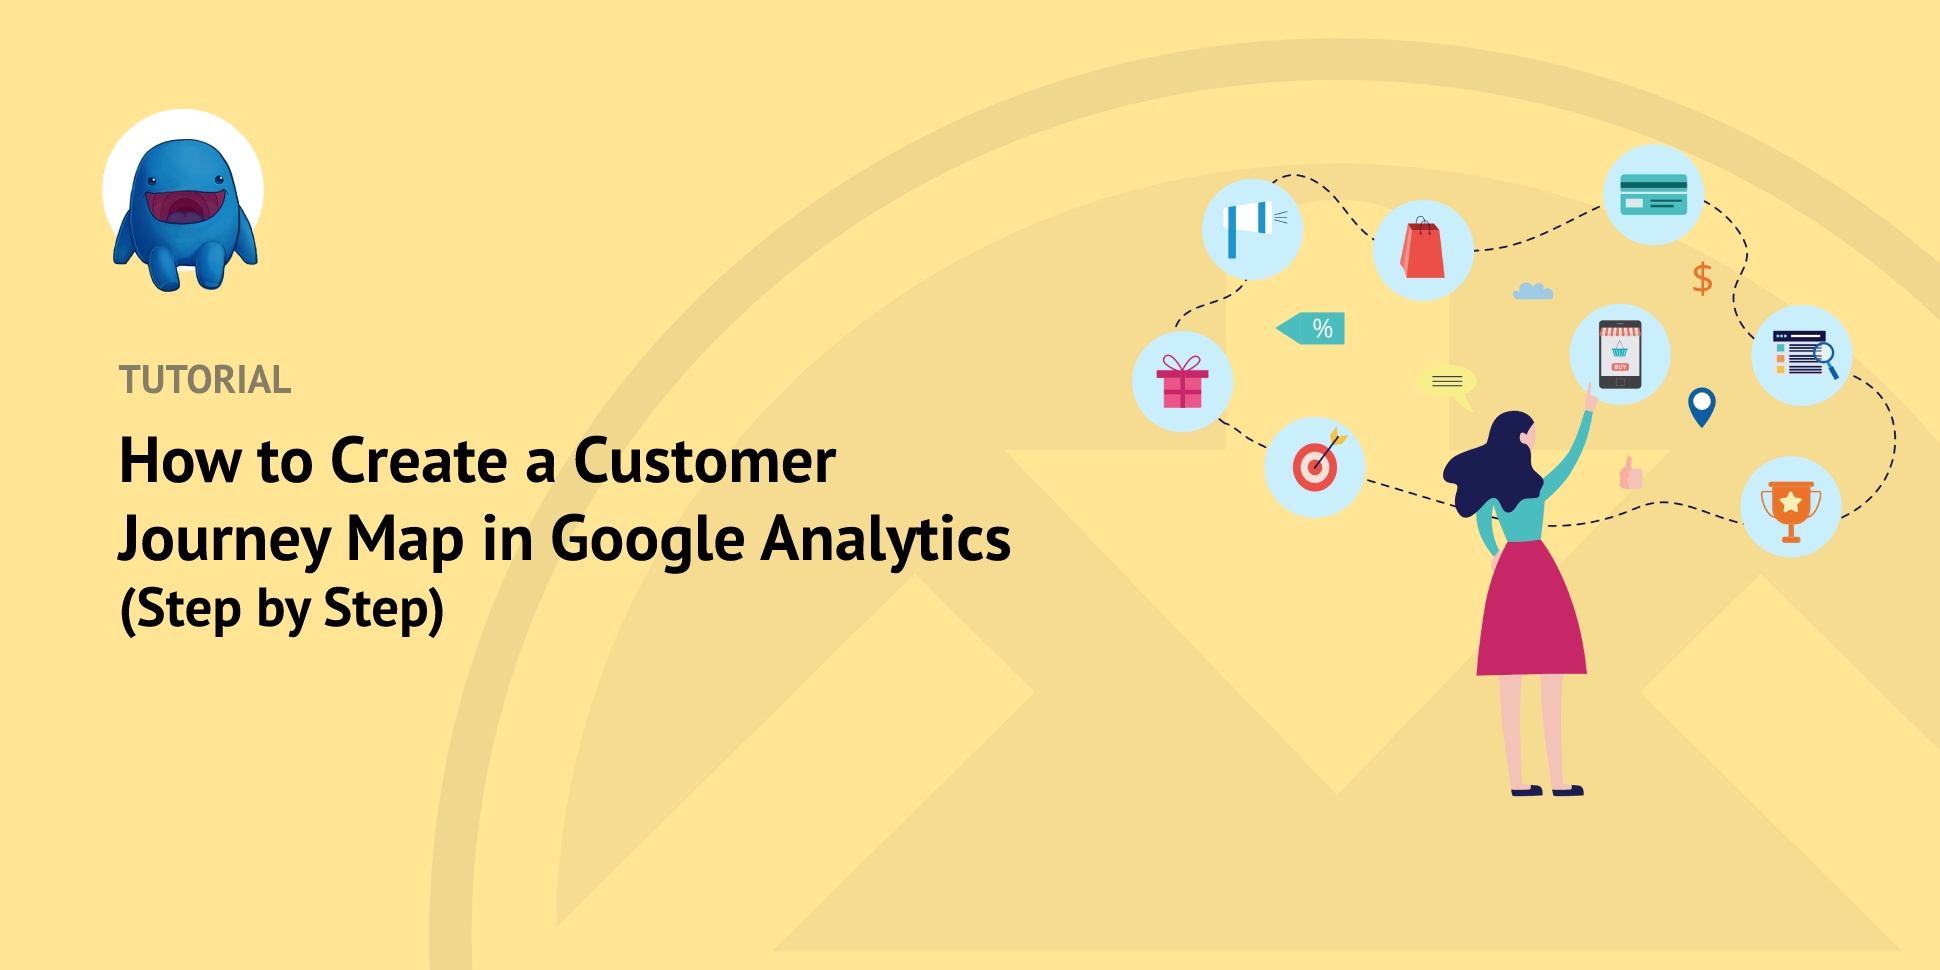 How to Create a Customer Journey Map in Google Analytics